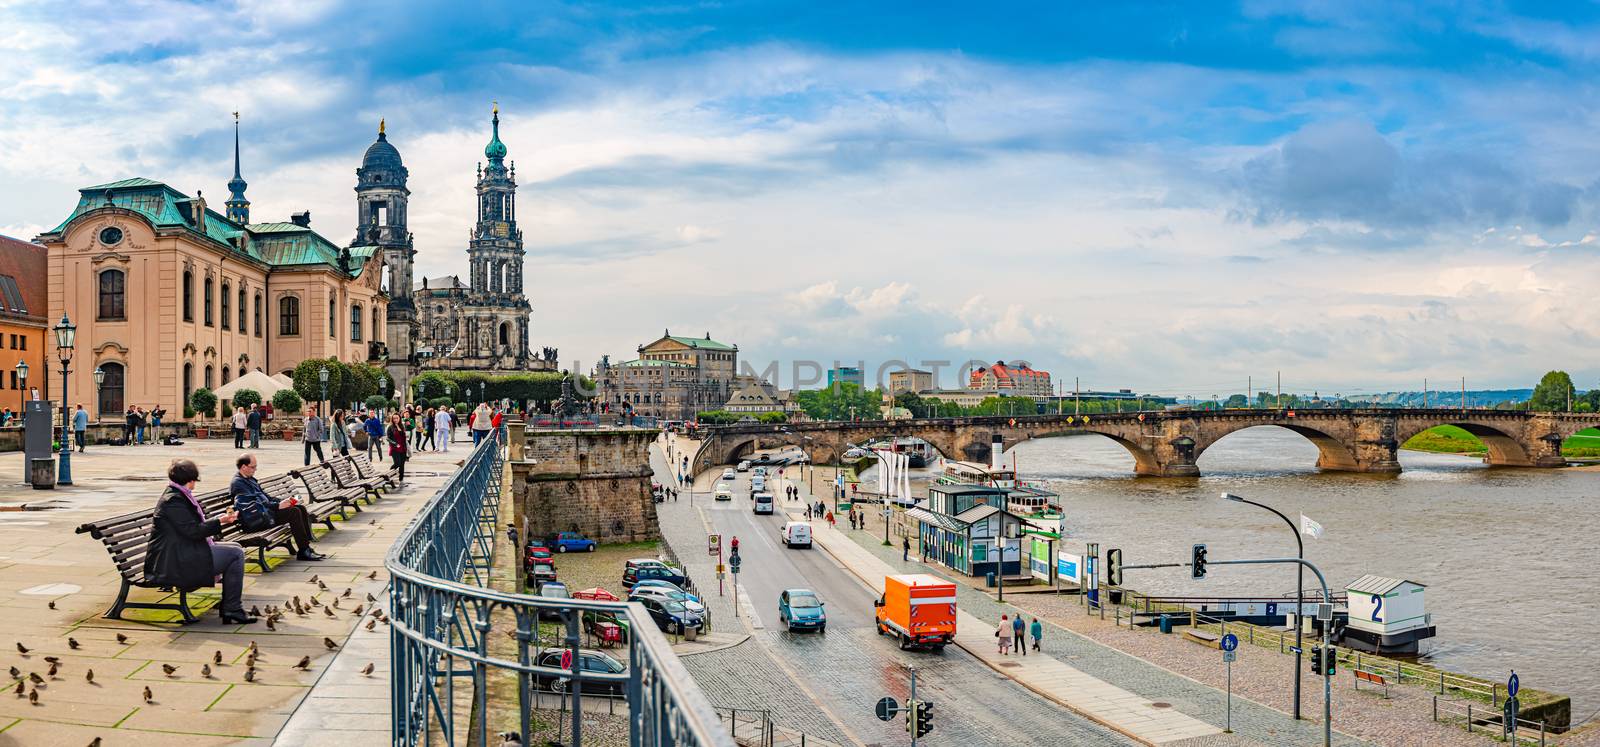 DRESDEN, GERMANY - SEPTEMBER 22, 2014: Katholische Hofkirche on the left and Semperoper on the right. People at river Elbe with bridge in background. Travel and architecture in Europe